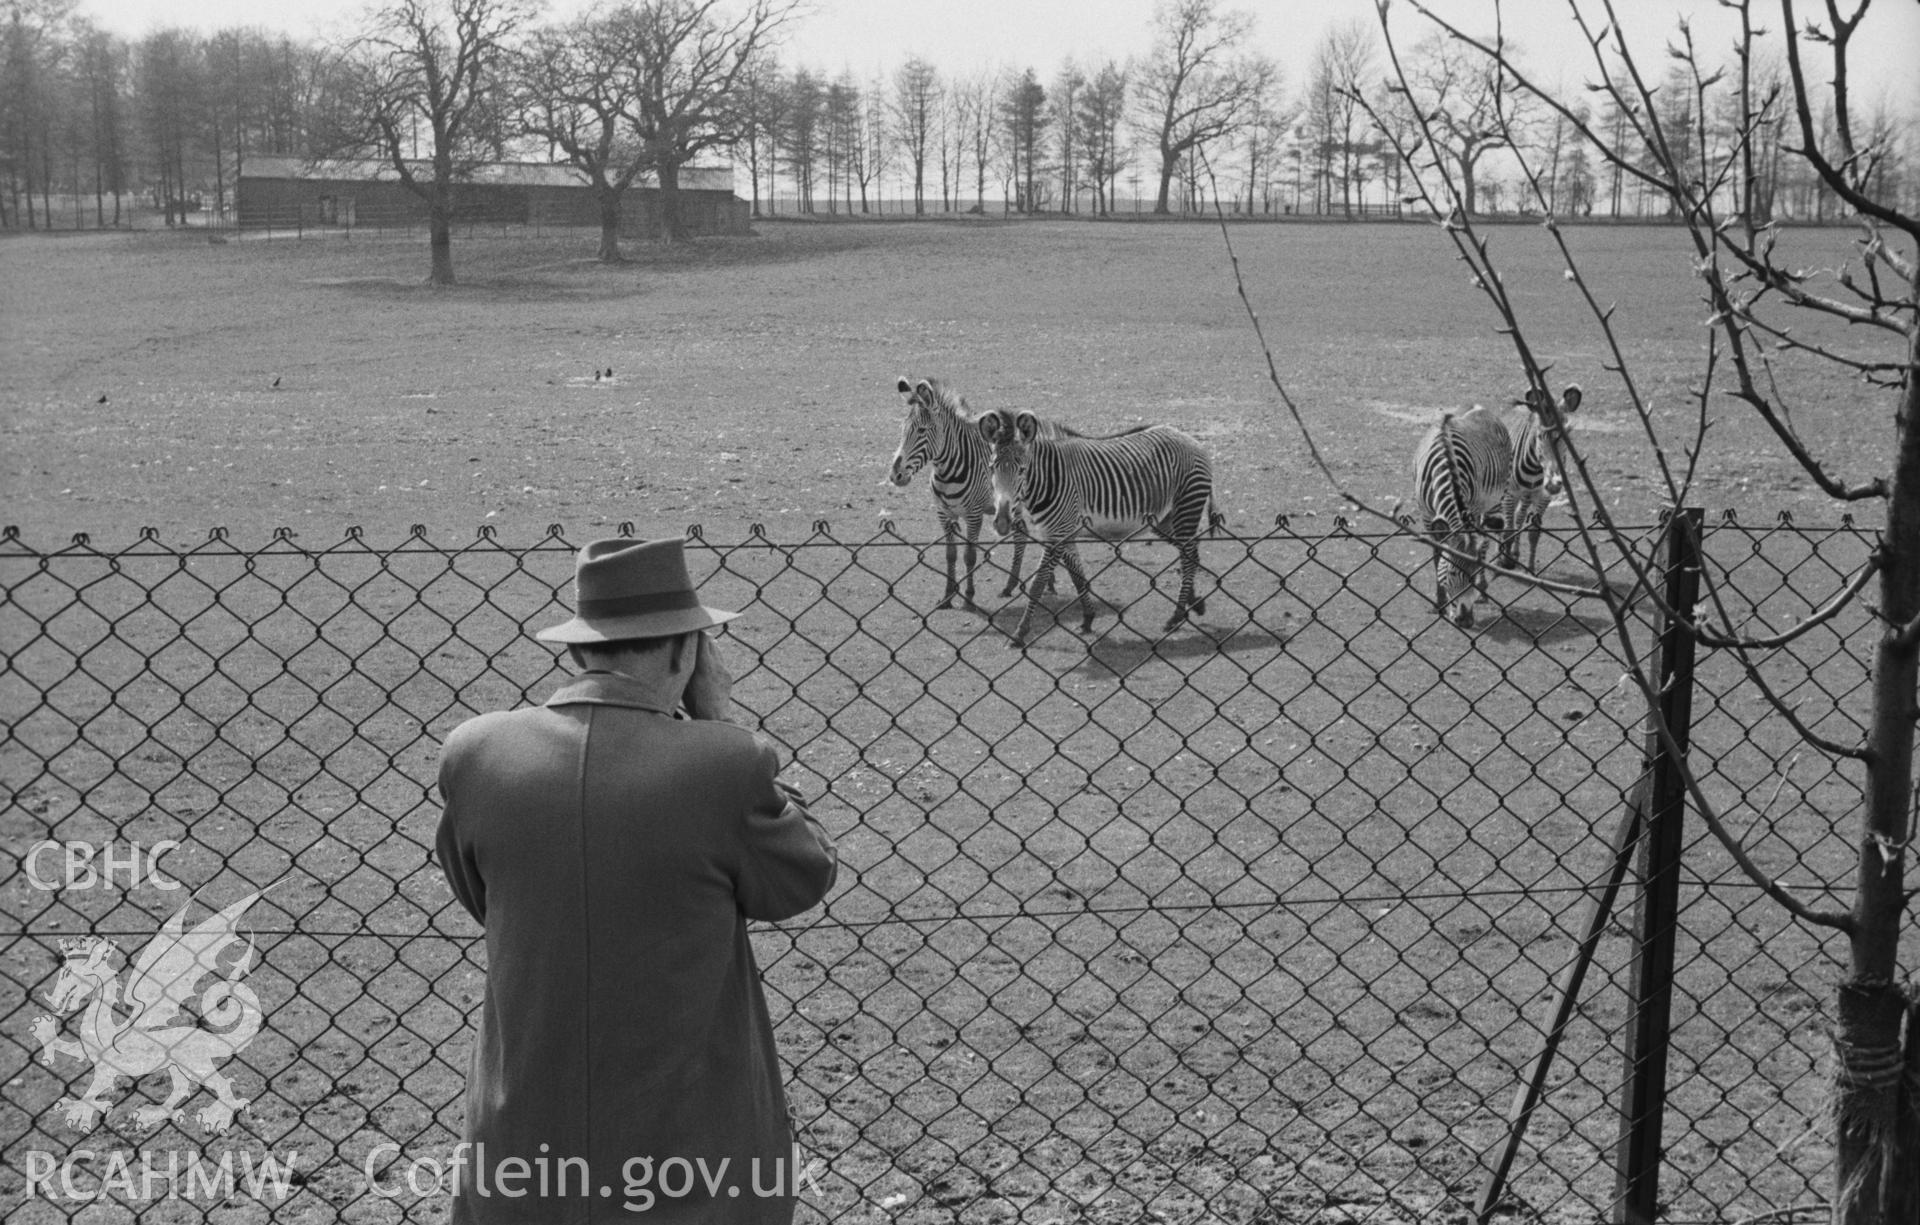 Black and White photograph showing  zebras at Whipsnade zoo.